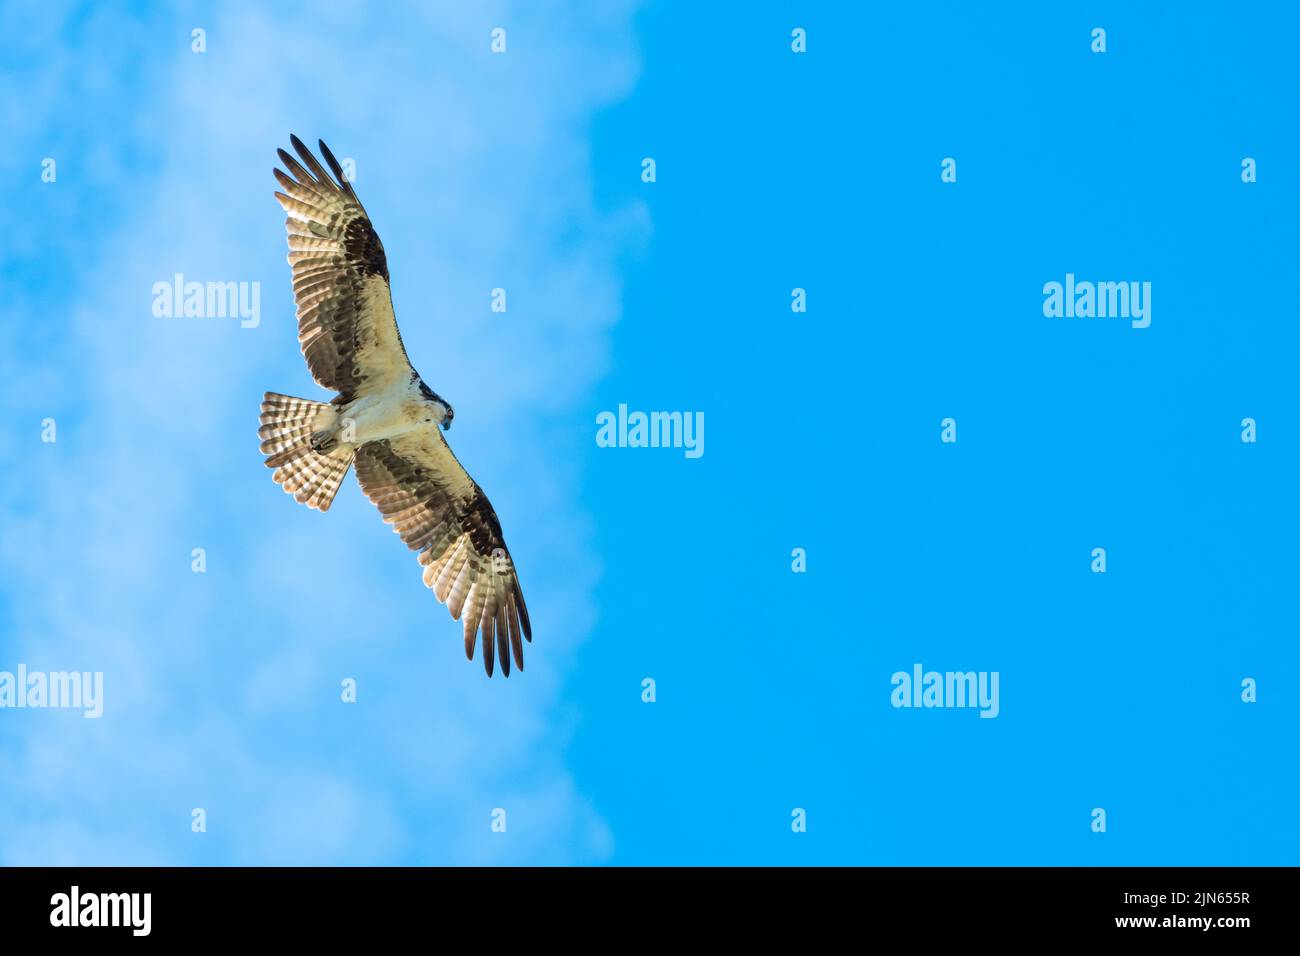 An Osprey, Pandion haliaetus, soaring in the blue sky hunting for prey. Stock Photo